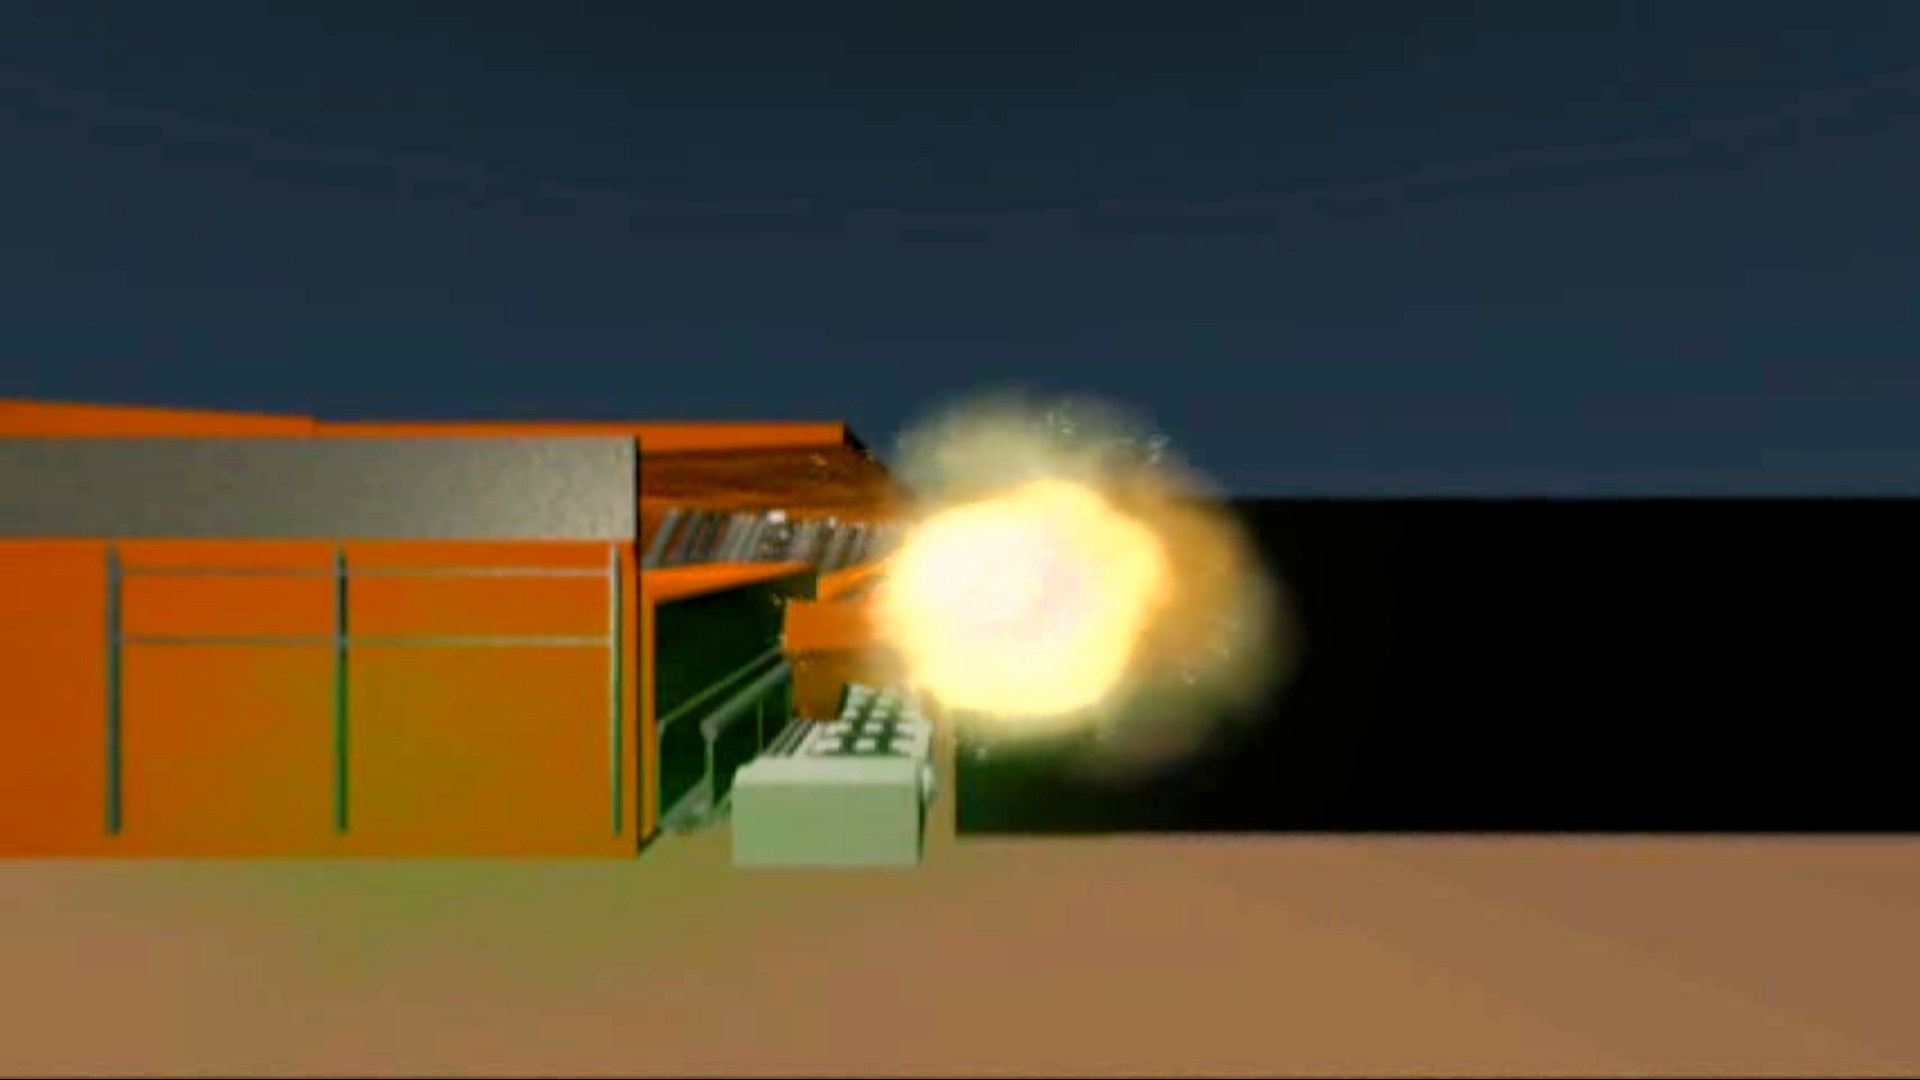 Illustration of mine equipment and an explosion